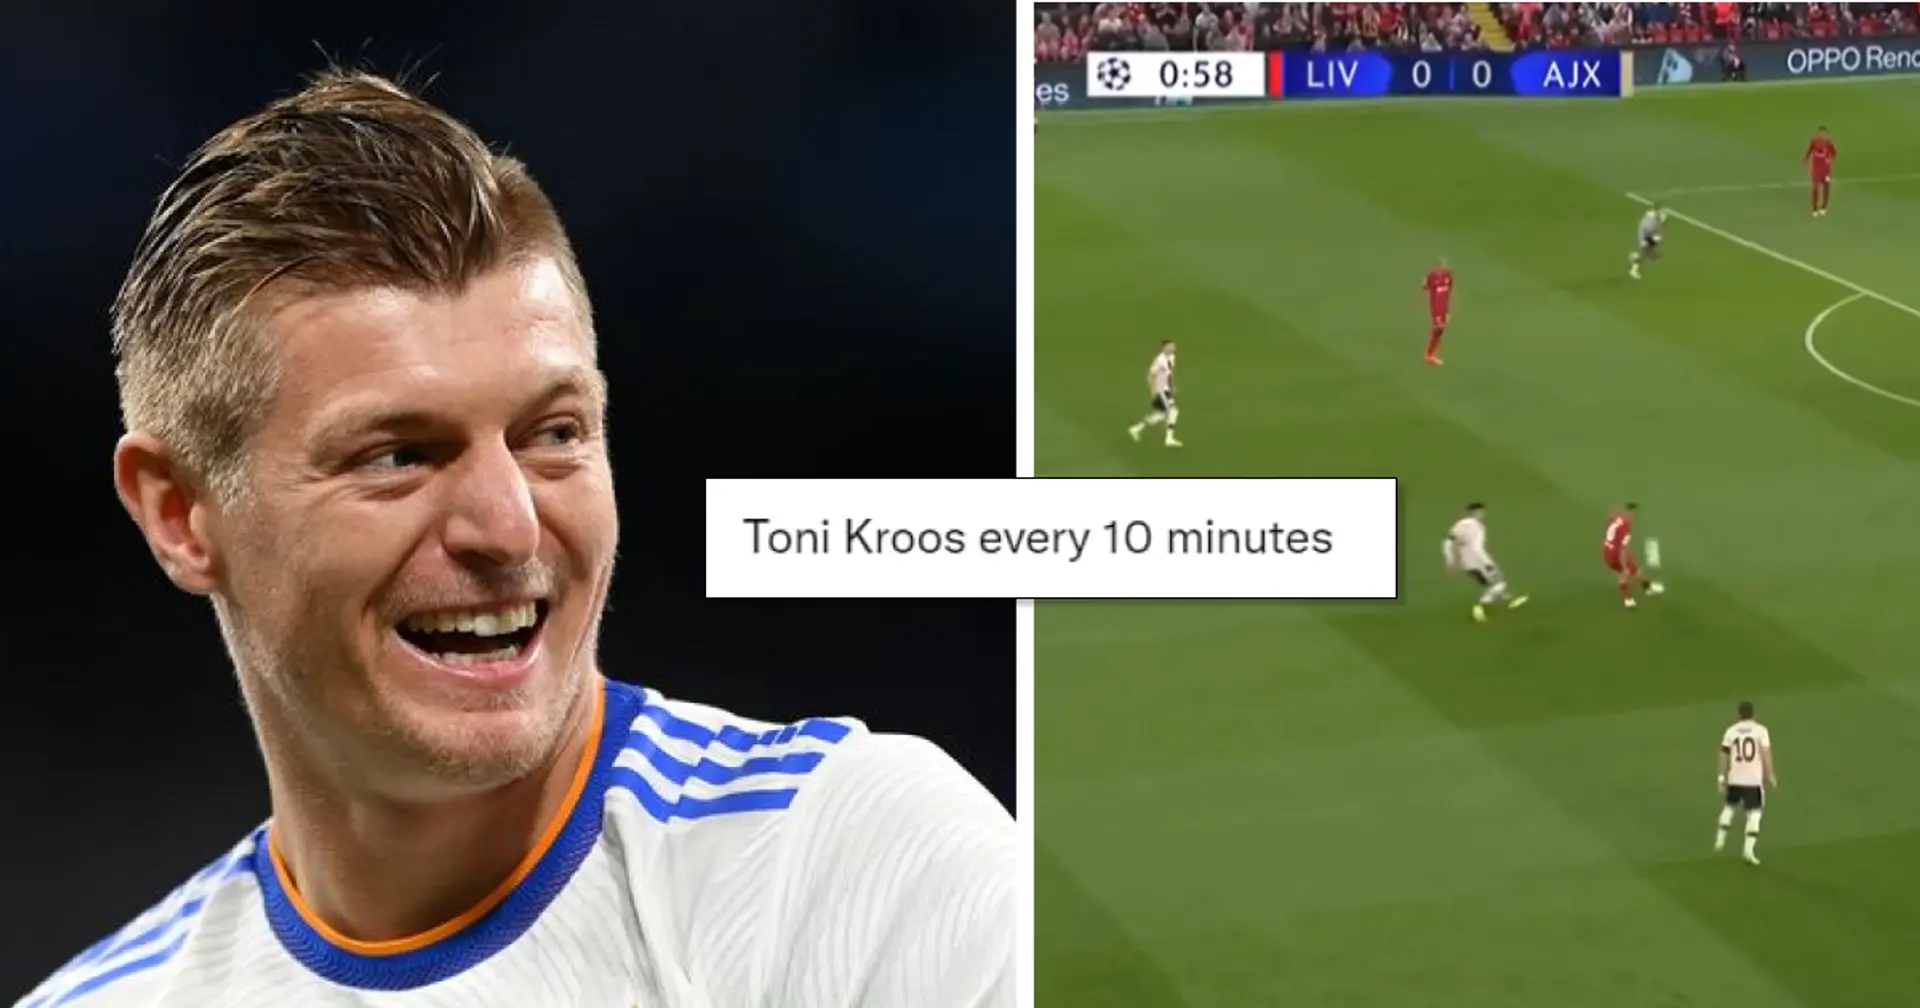 'Kroos does it with his eyes closed': Madrid fans not impressed as Thiago Alcantara pass goes viral